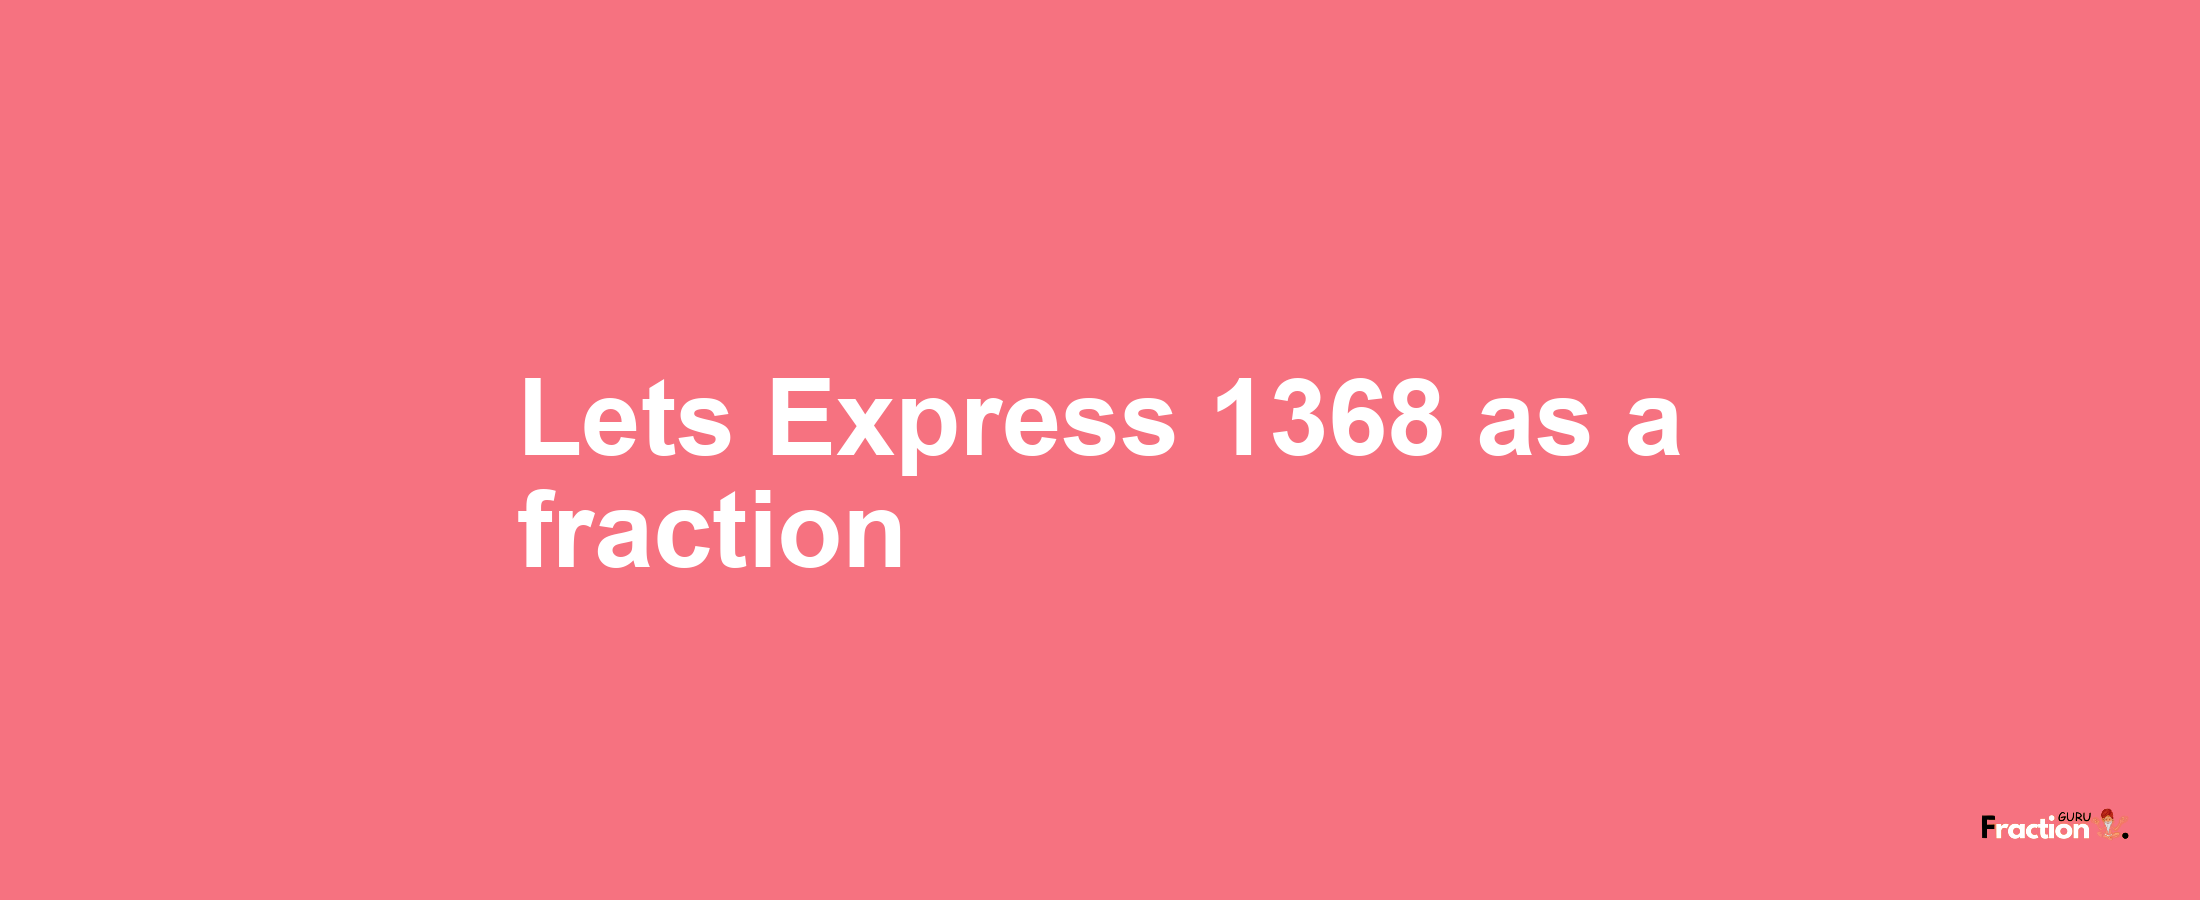 Lets Express 1368 as afraction